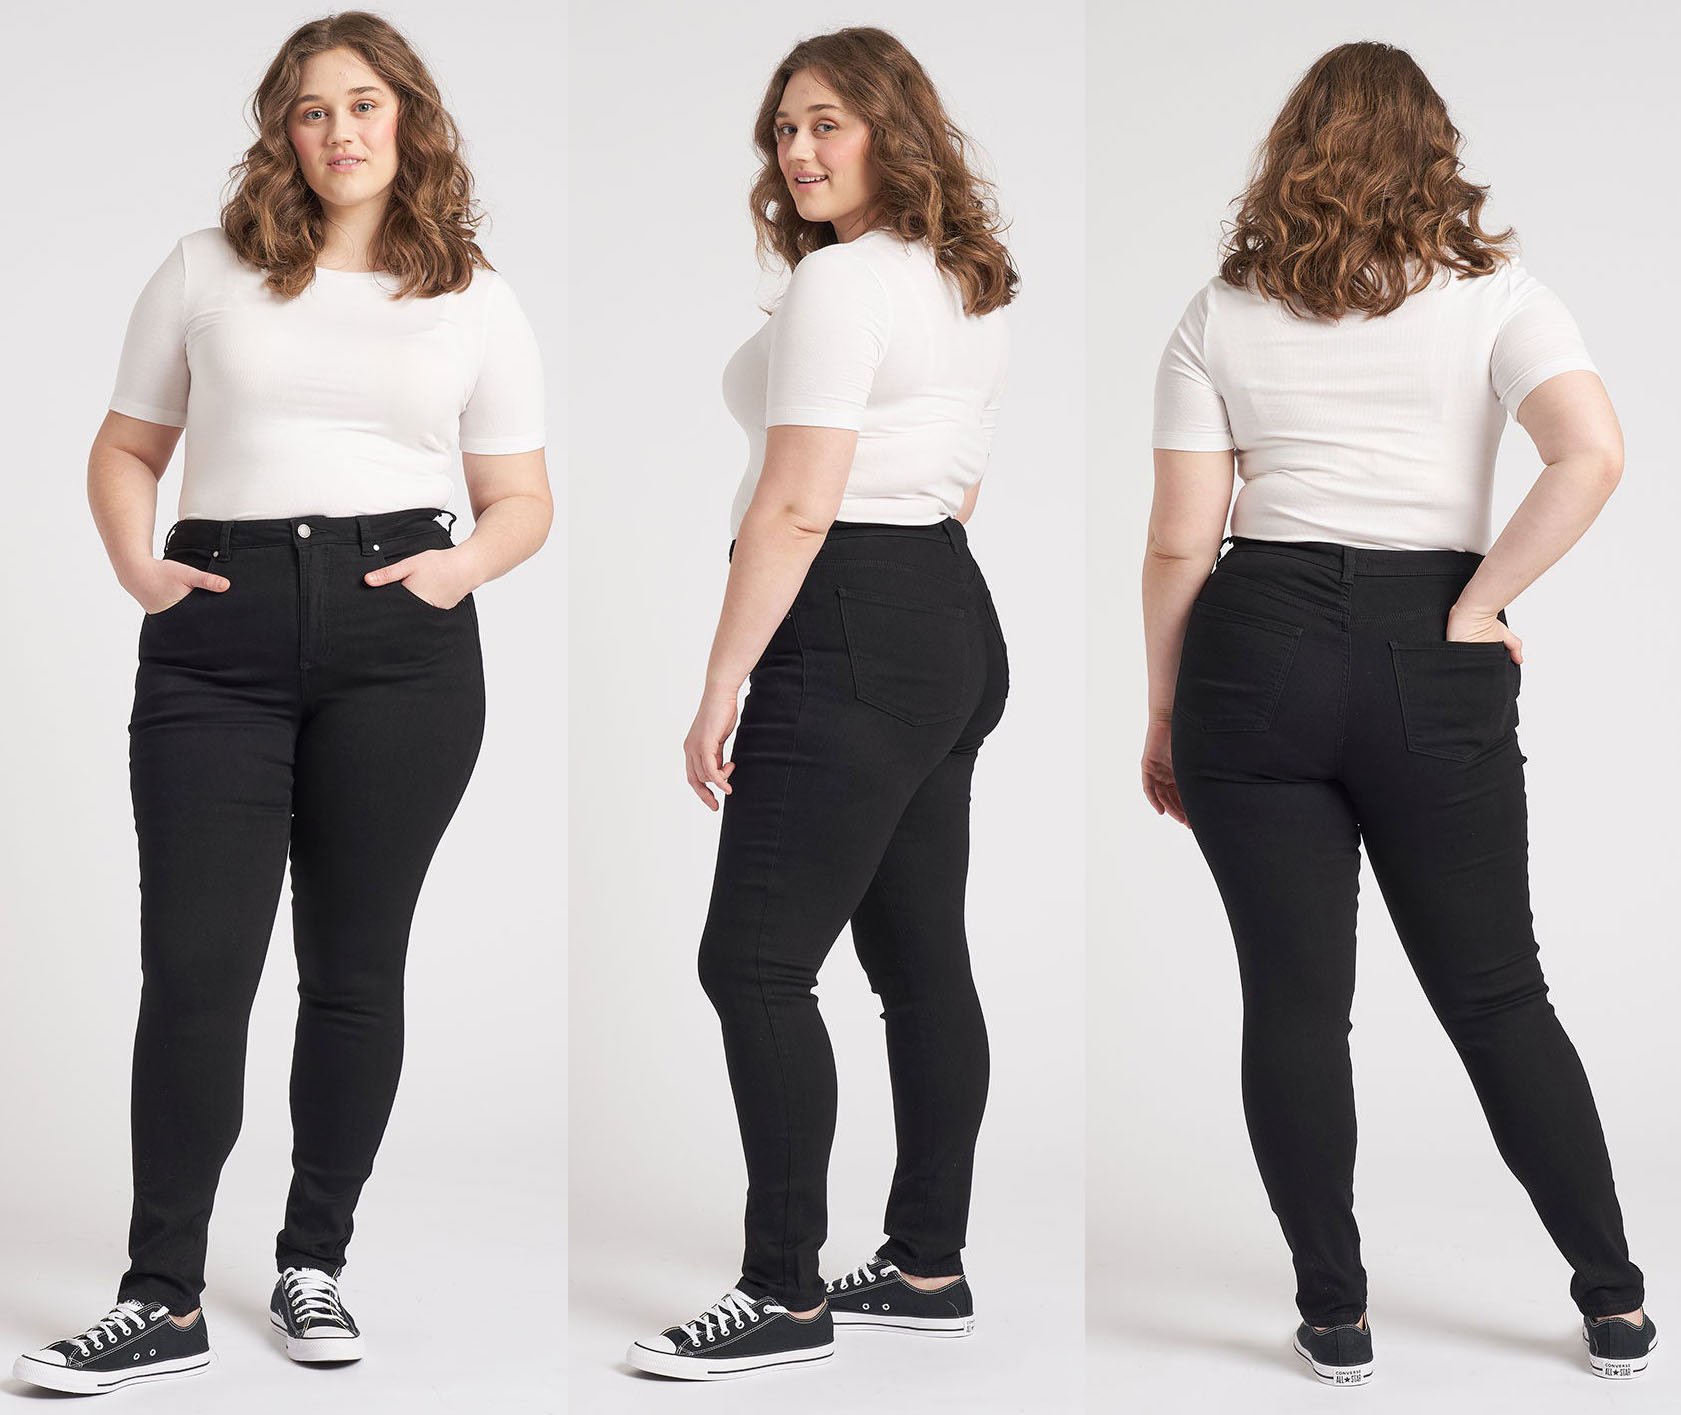 Seine jeans, designed with a high waist and invisible stretch, ensure comfort and a perfect fit every time